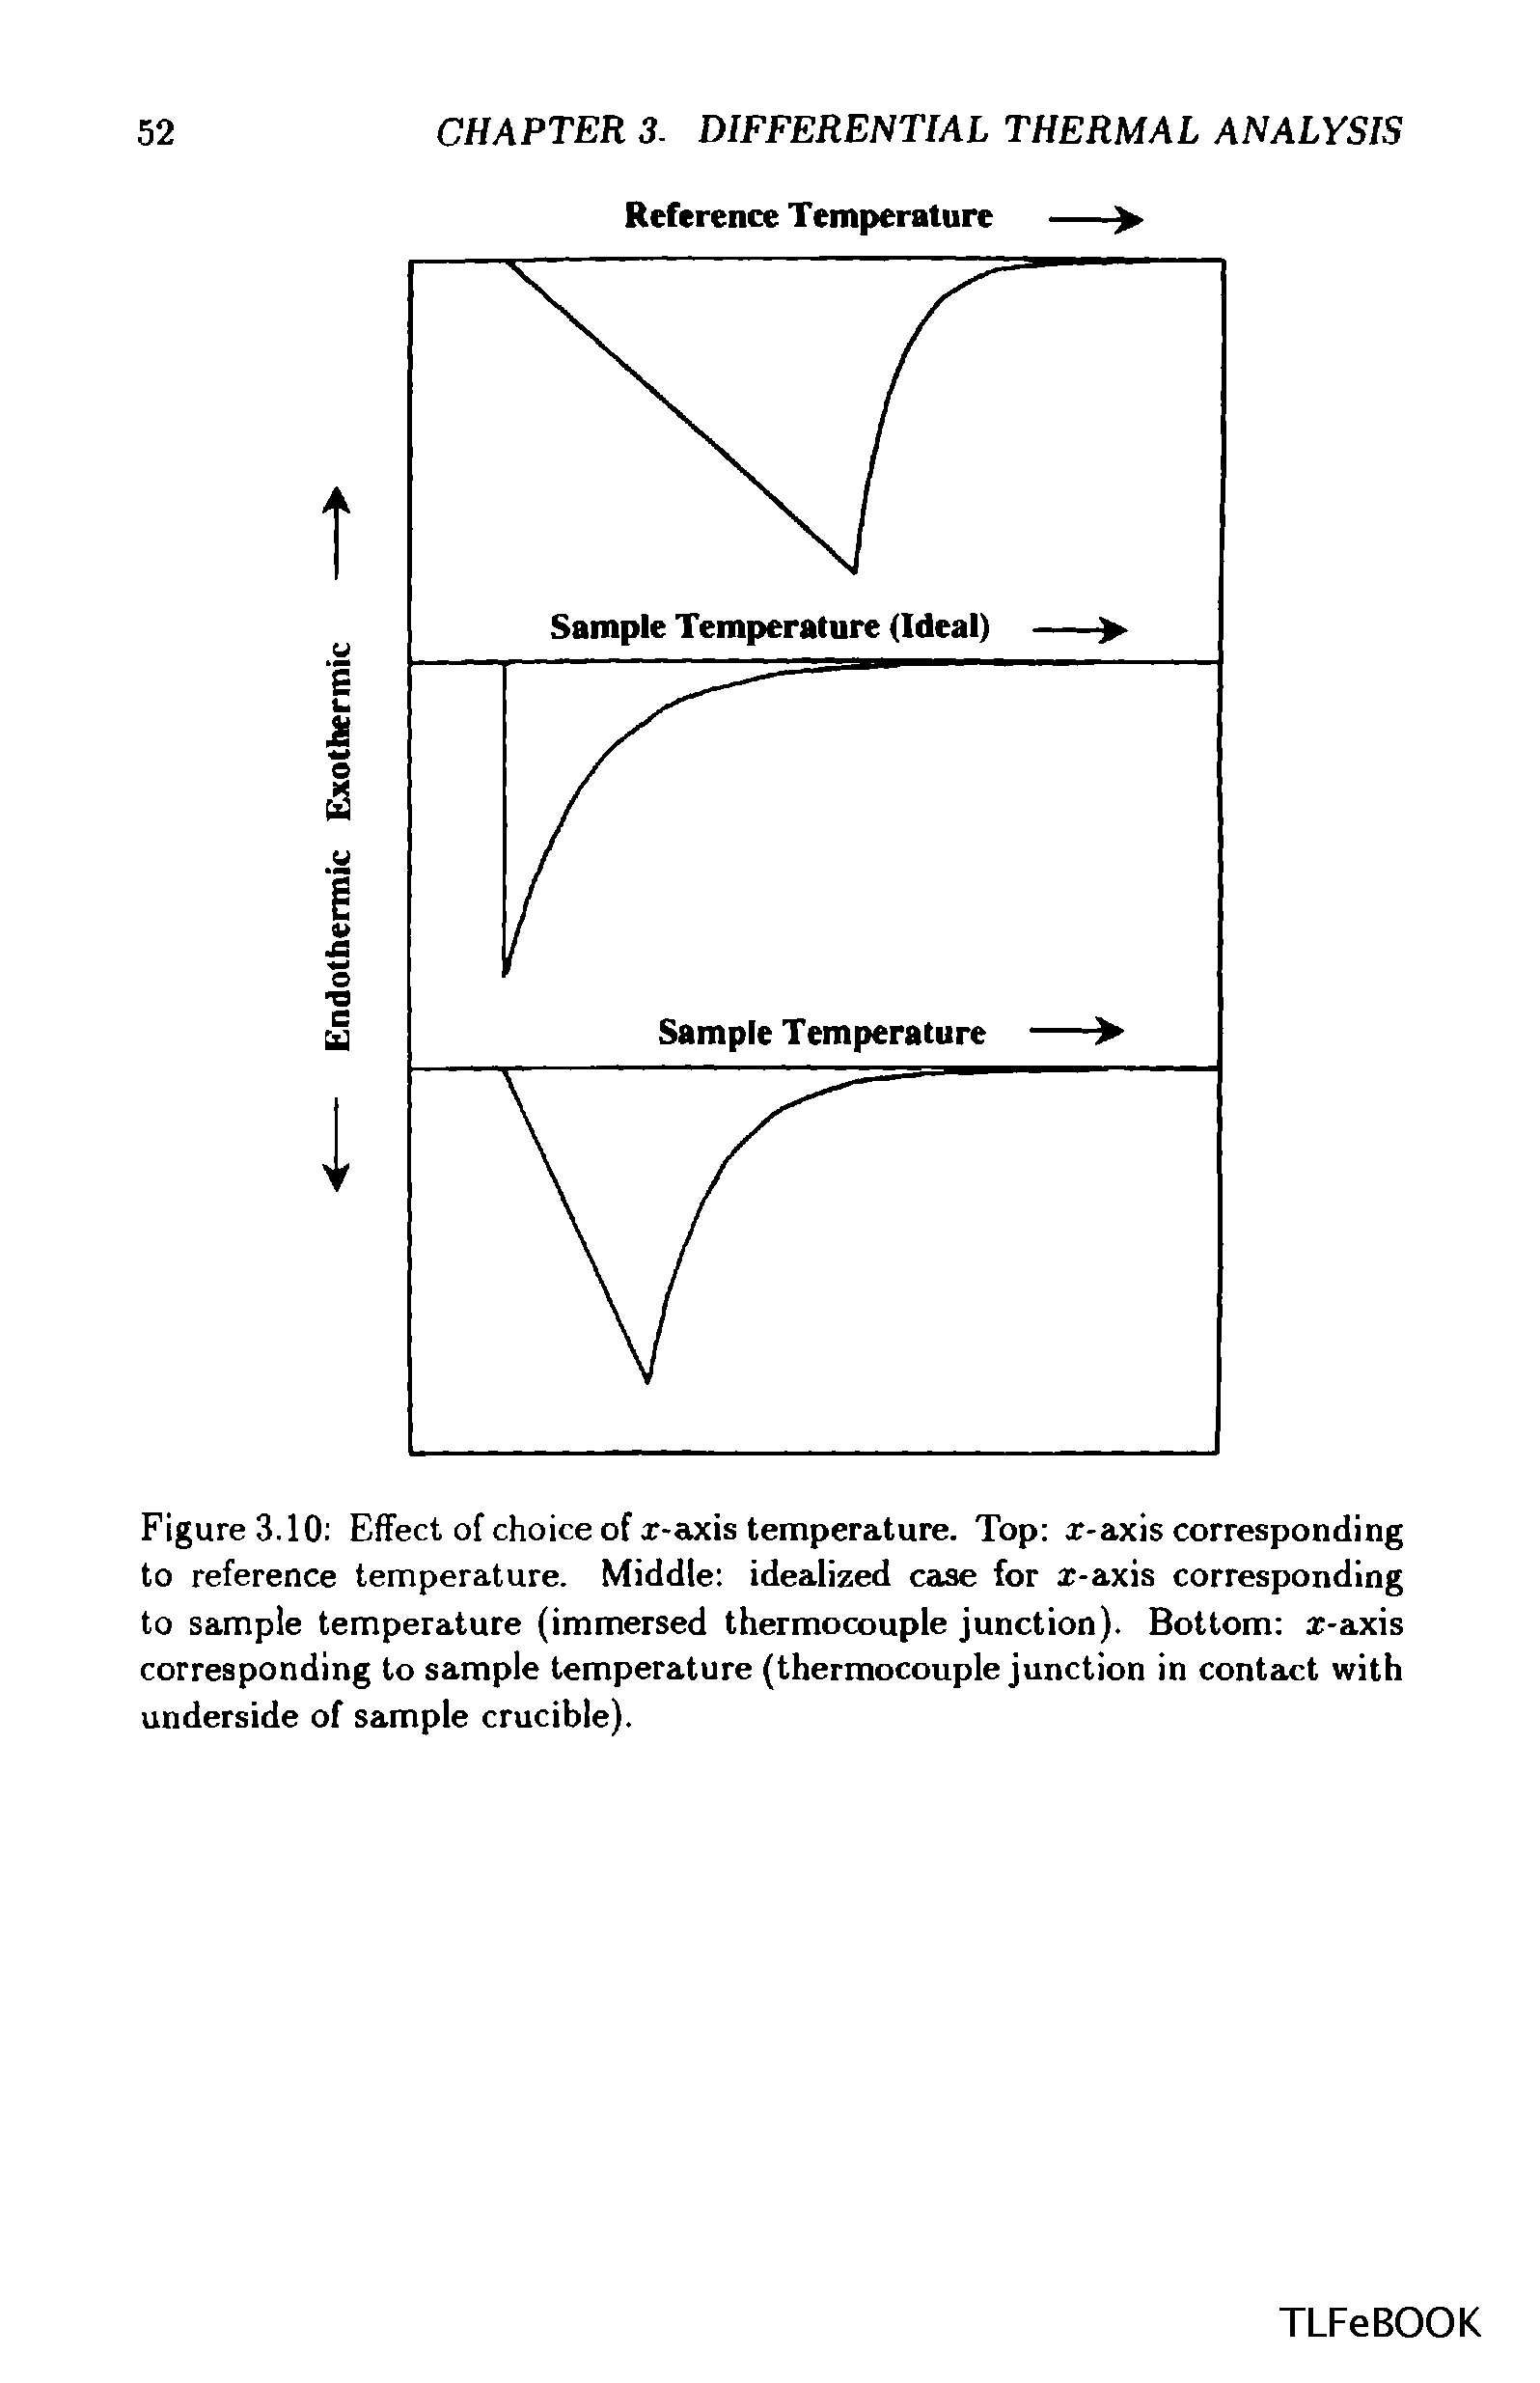 Figure 3.10 Effect of choice of x-axis temperature. Top x-axis corresponding to reference temperature. Middle idealized case for 2-axis corresponding to sample temperature (immersed thermocouple junction). Bottom x-axis corresponding to sample temperature (thermocouple junction in contact with underside of sample crucible).